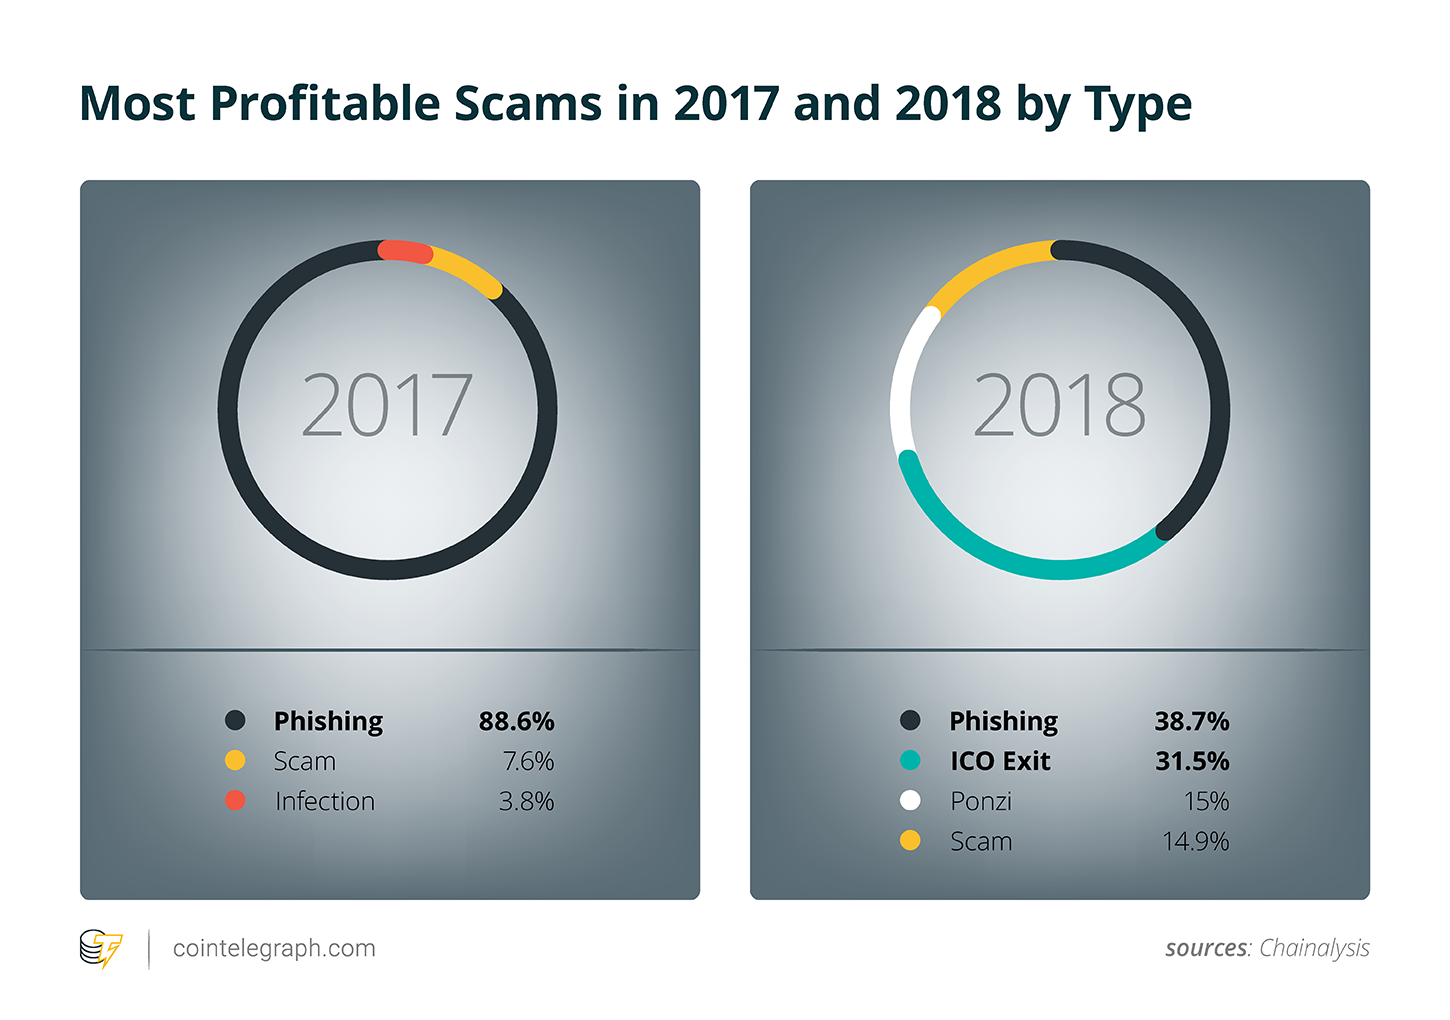 Most Profitable Scams in 2017 and 2018 by Type